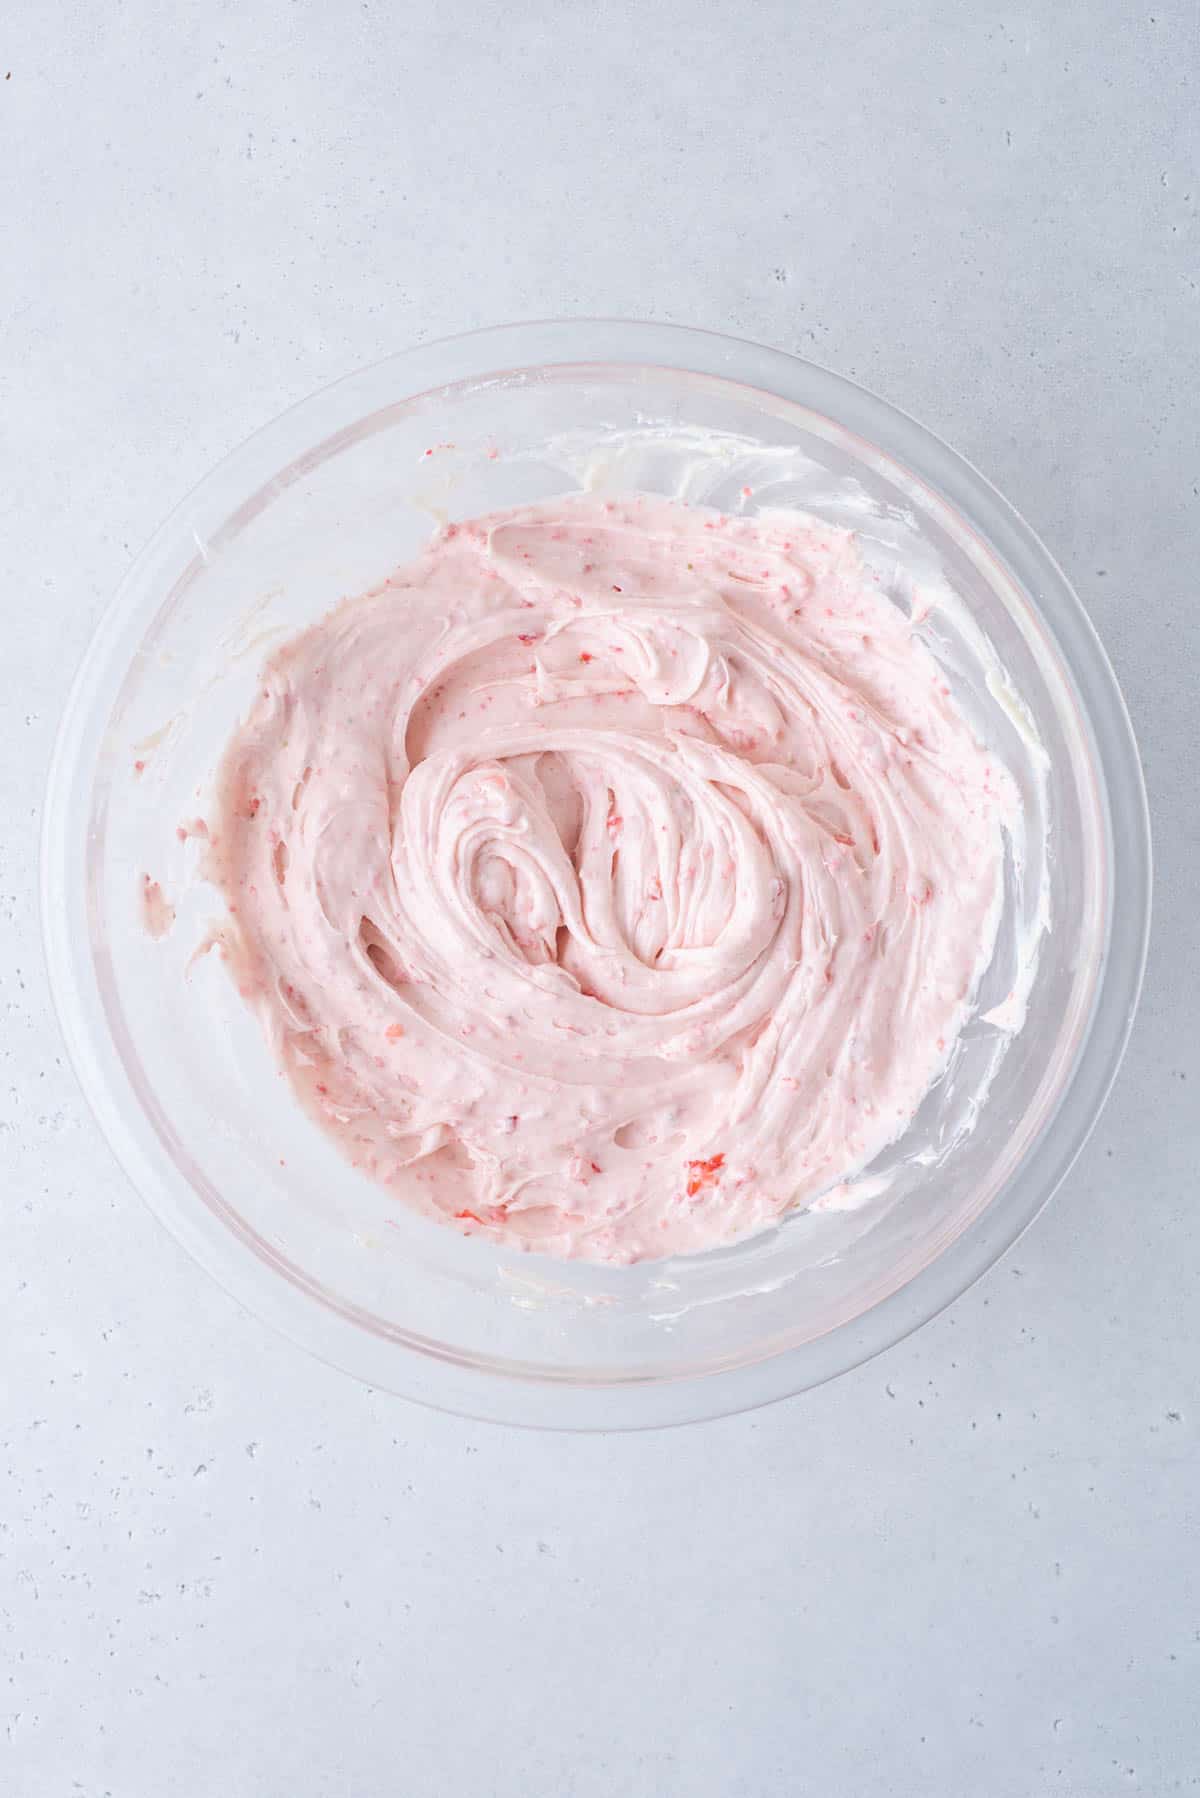 Strawberry Frosting in a clear glass bowl on a white surface